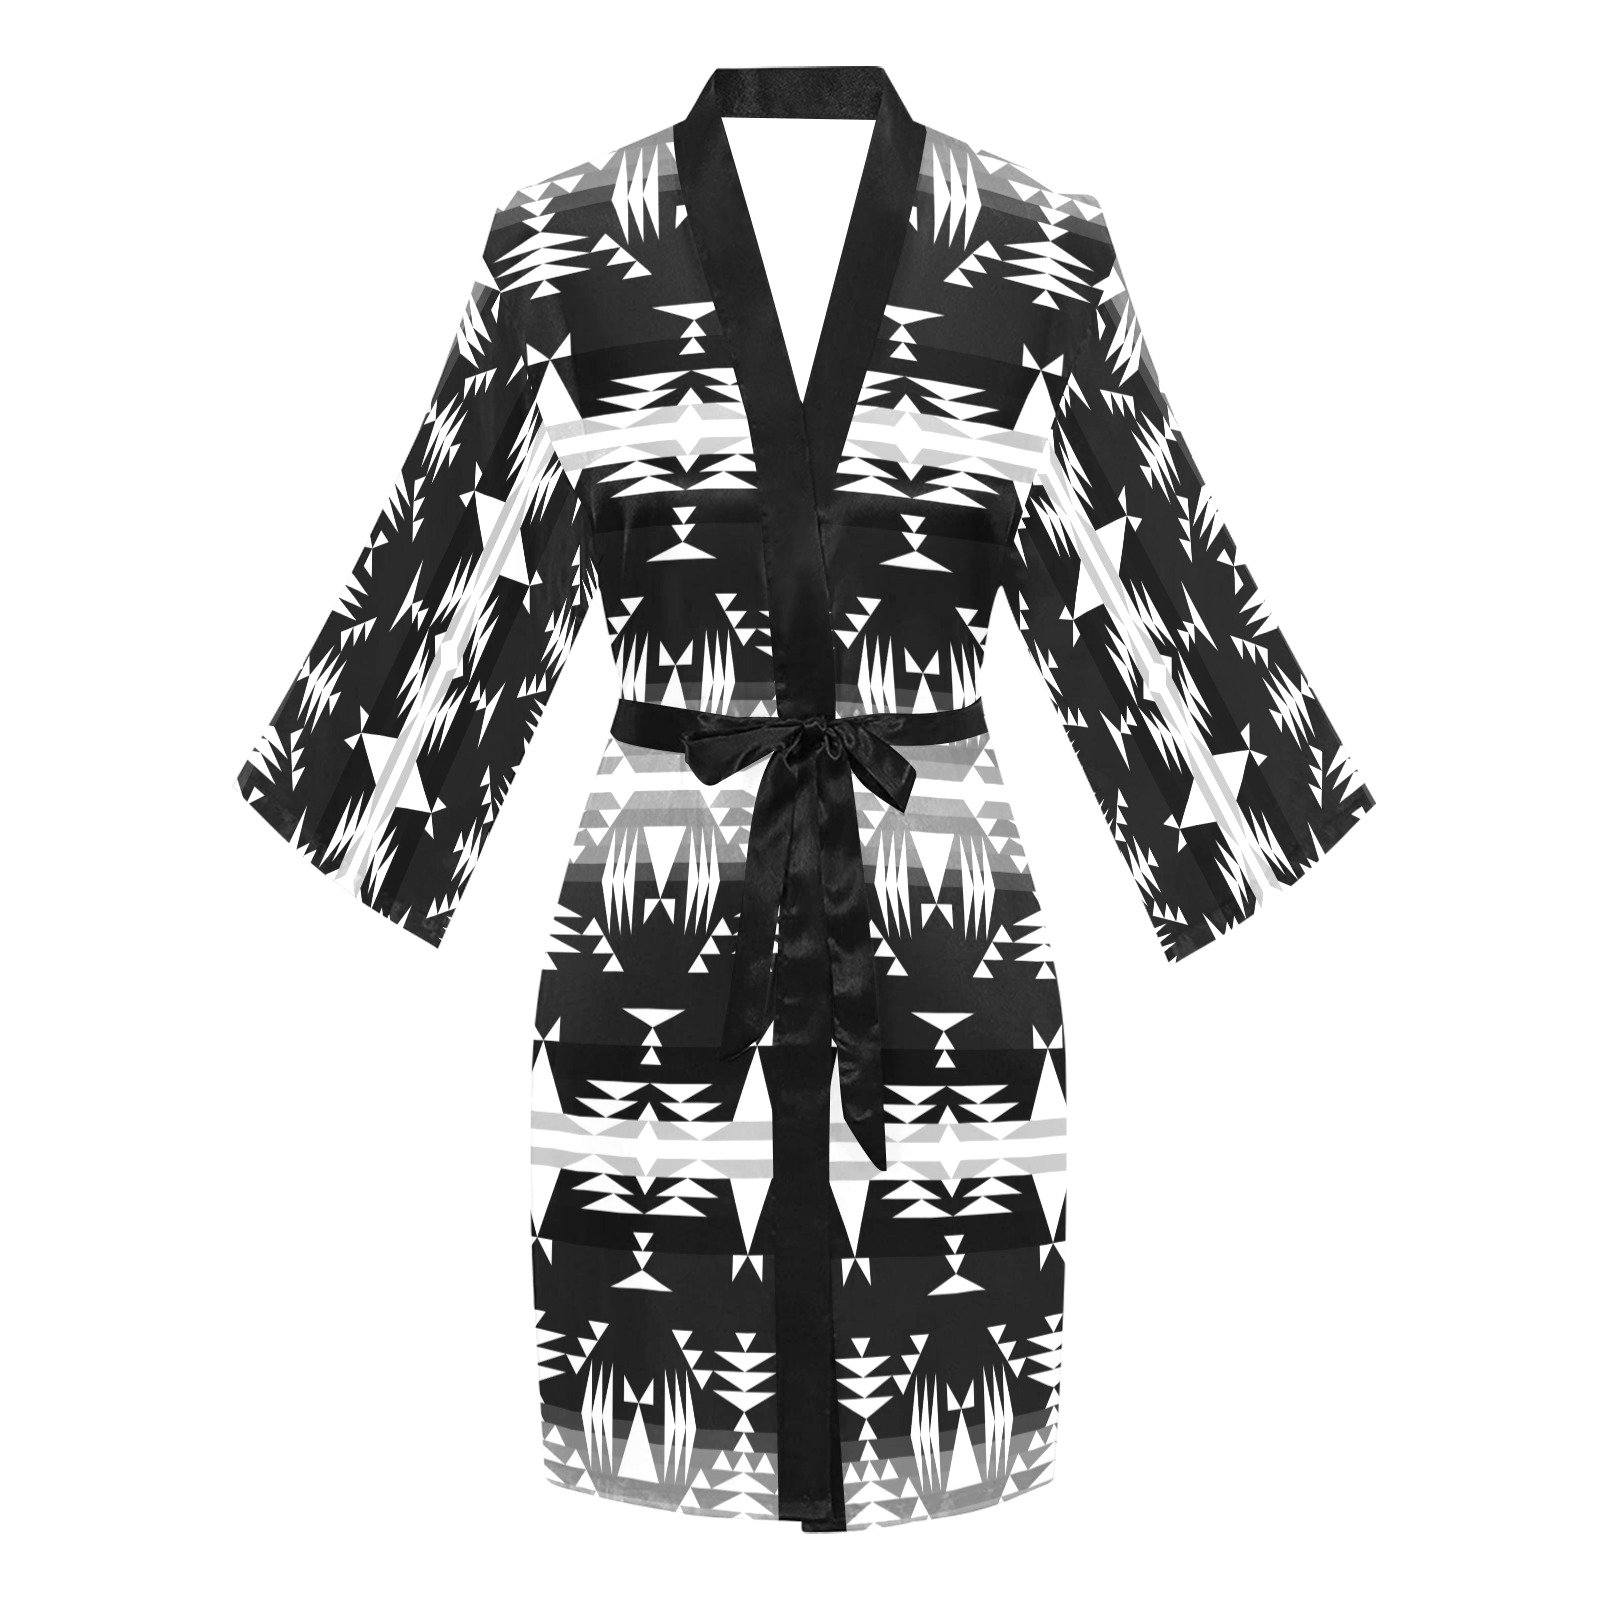 Between the Mountains Black and White Long Sleeve Kimono Robe Long Sleeve Kimono Robe e-joyer 